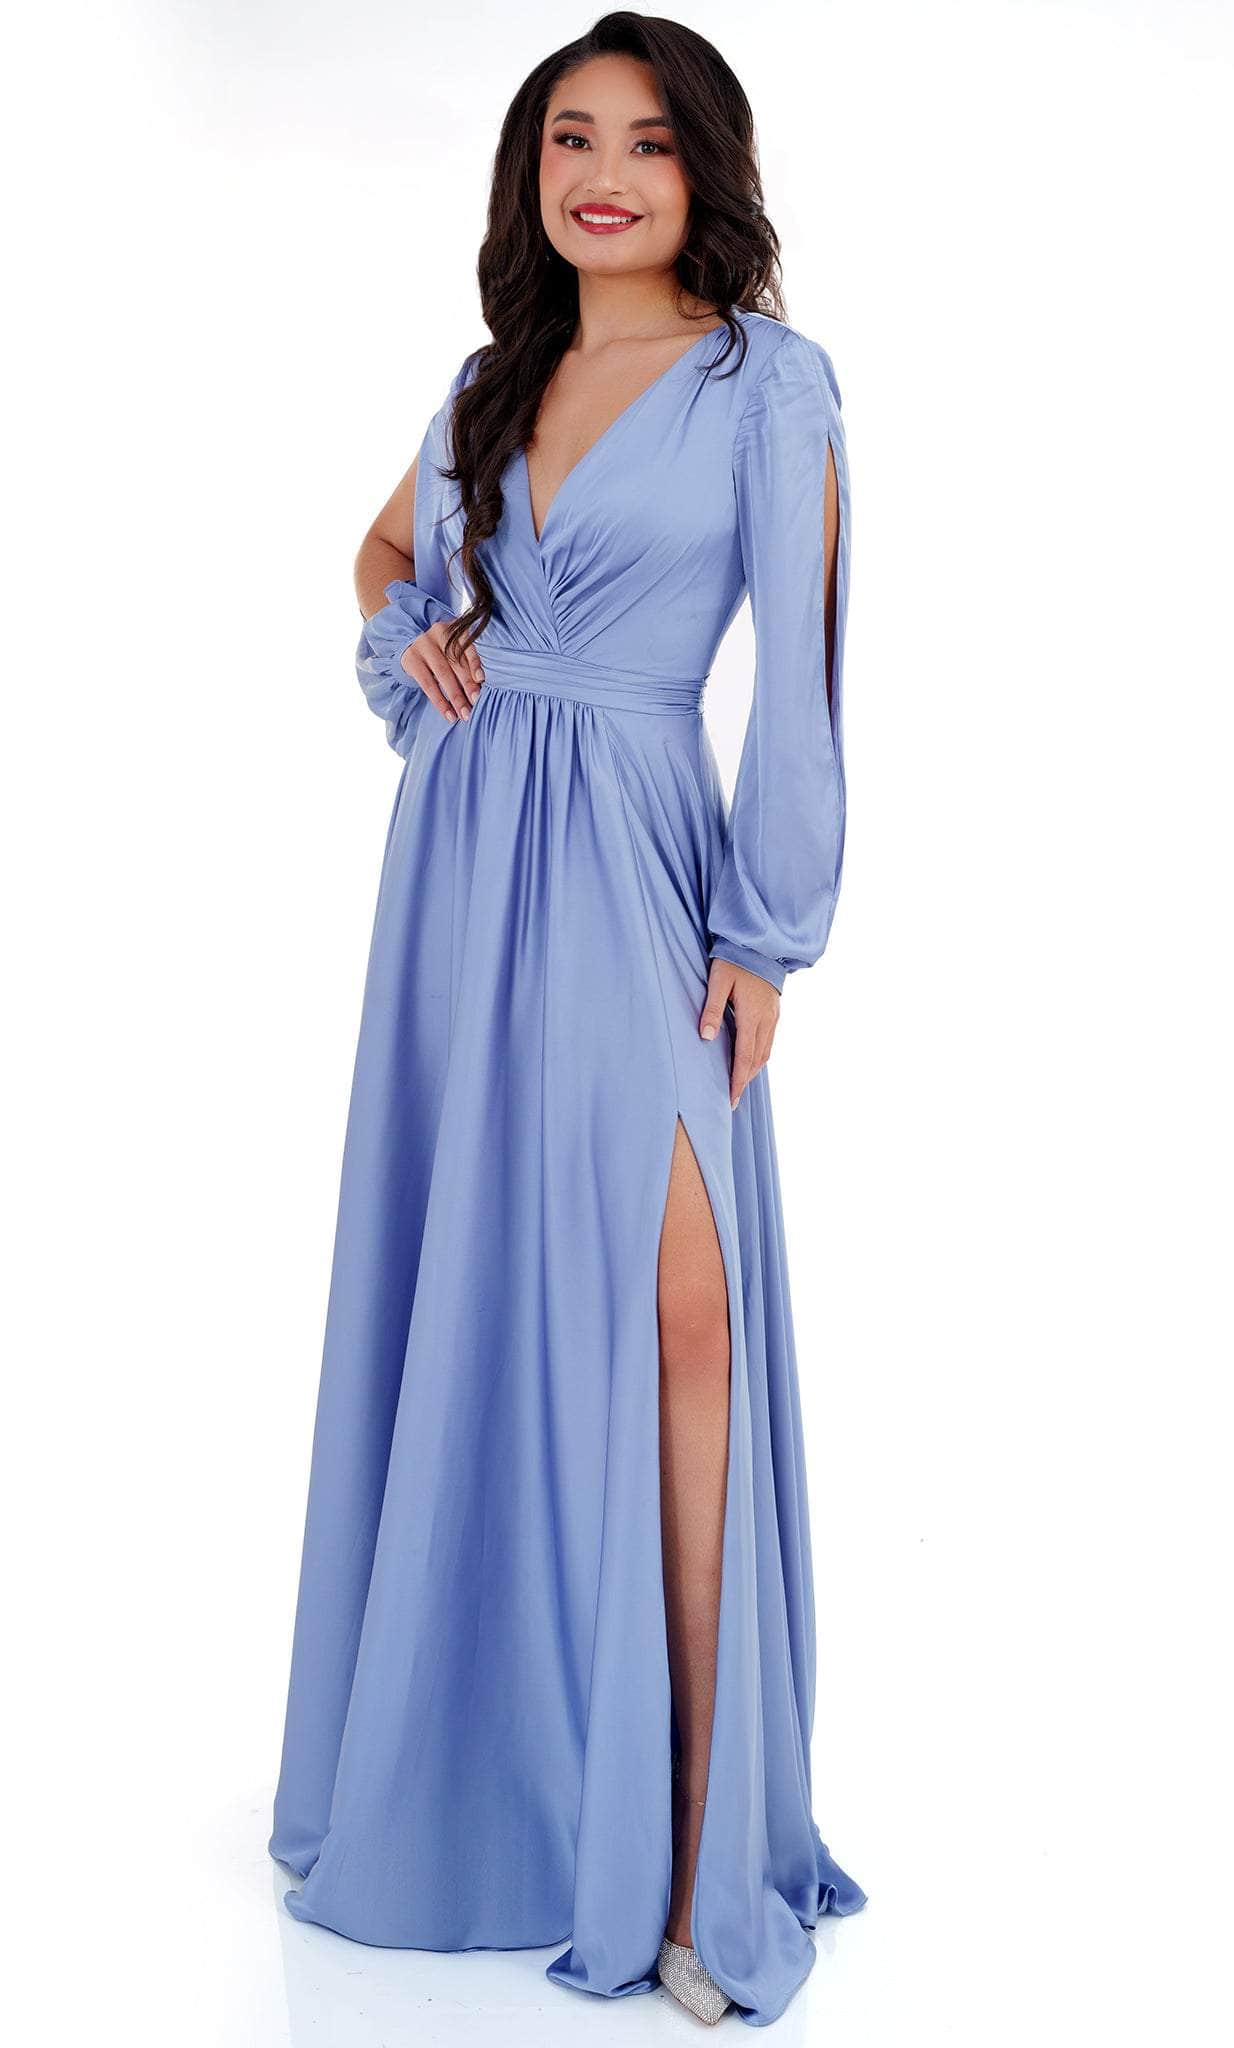 Image of Cecilia Couture 2520 - Open Long Sleeve A-Line Prom Dress